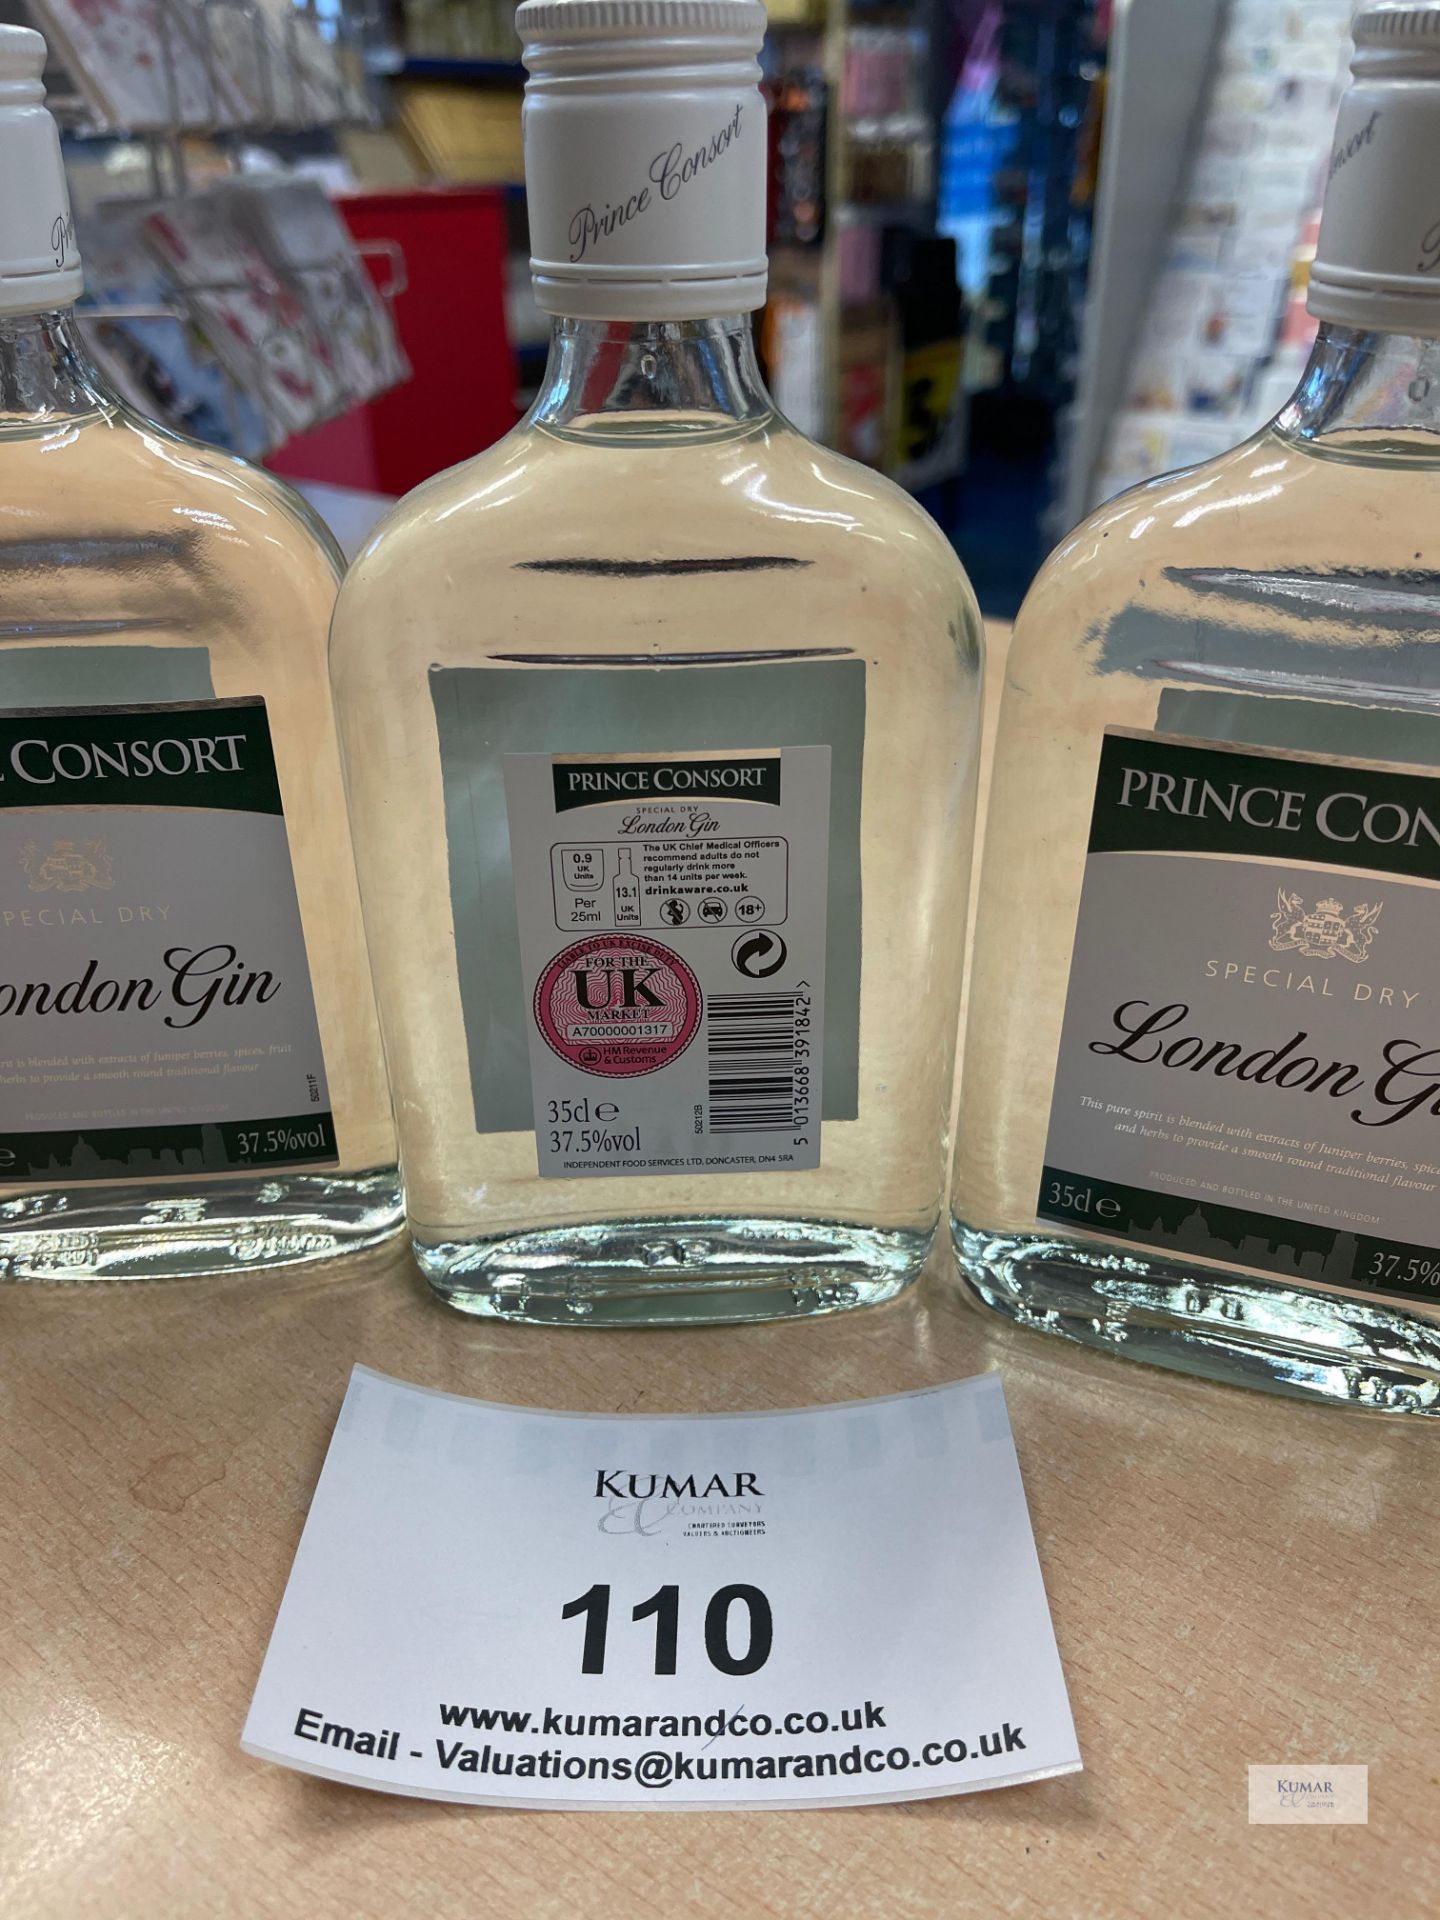 6 Bottles 35cl Prince Consort London Gin - Image 2 of 2